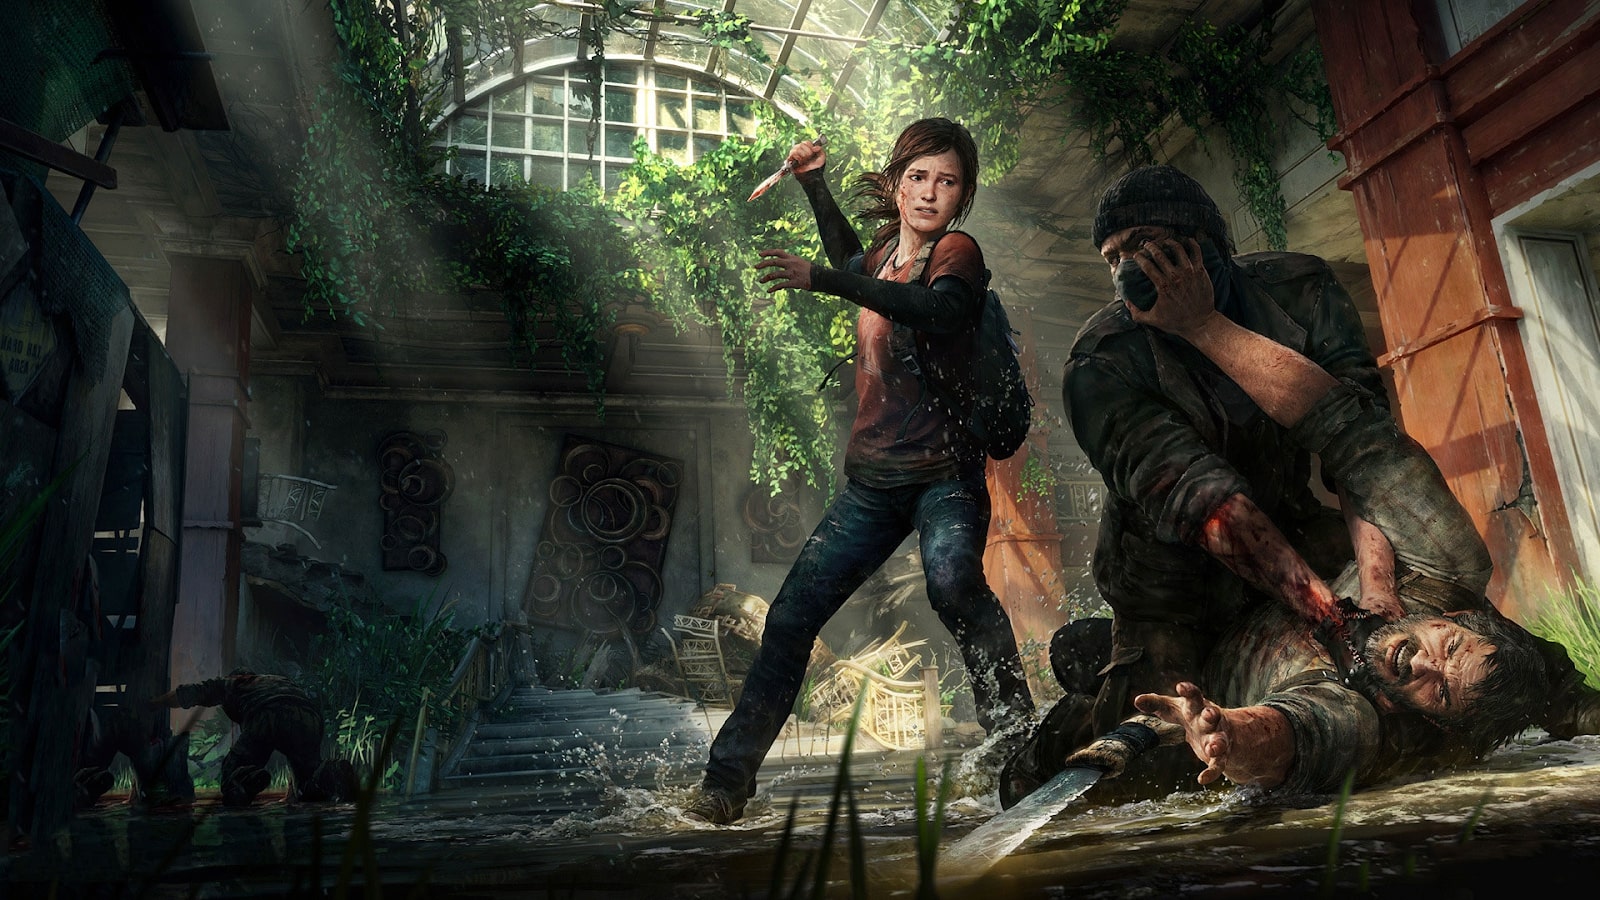 Naughty Dog is 'working hard' to fix The Last of Us on PC